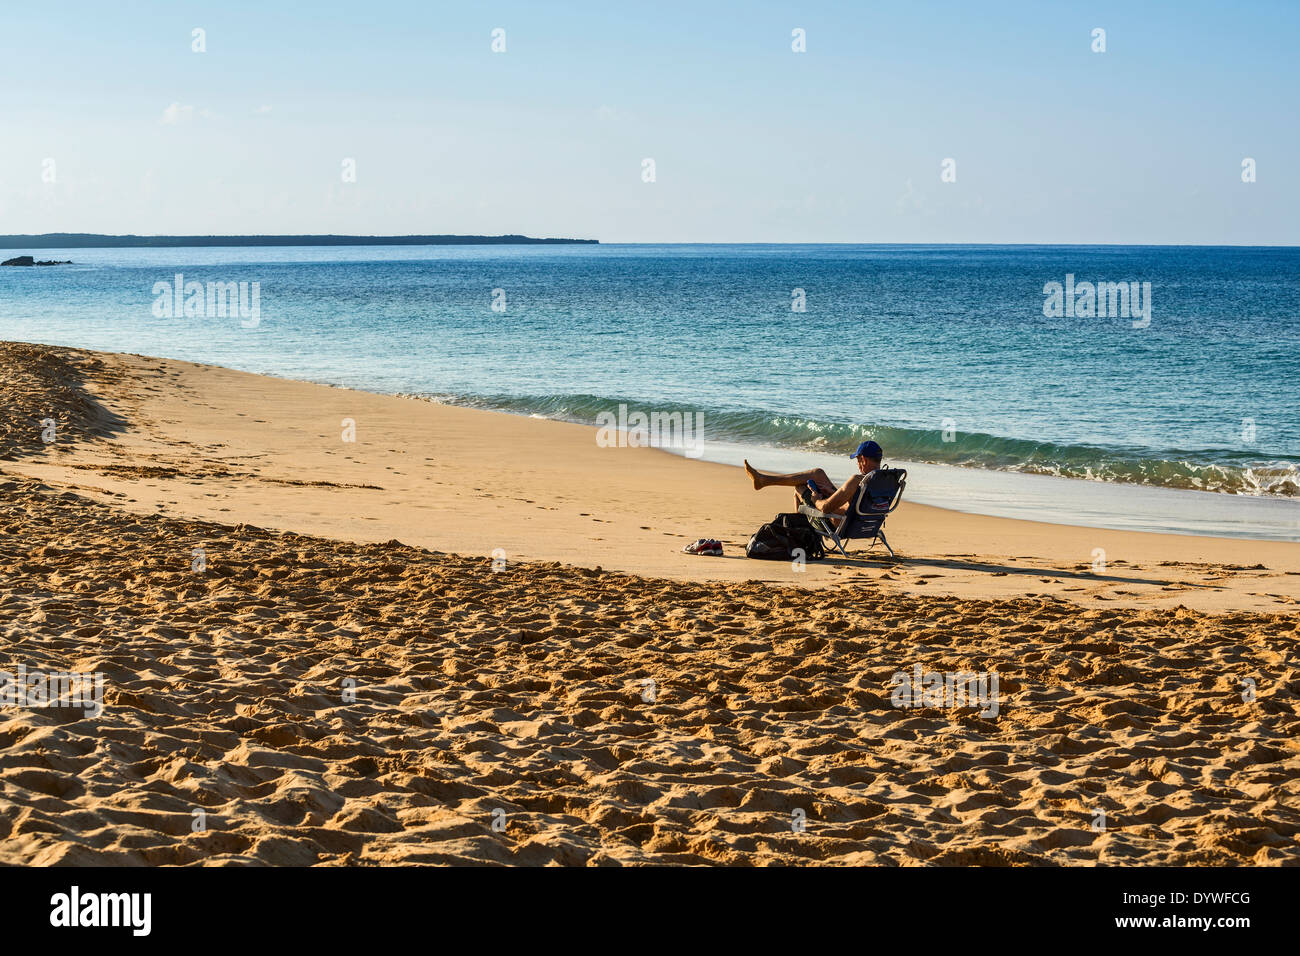 The famous and pristine Big Beach in Maui. Stock Photo